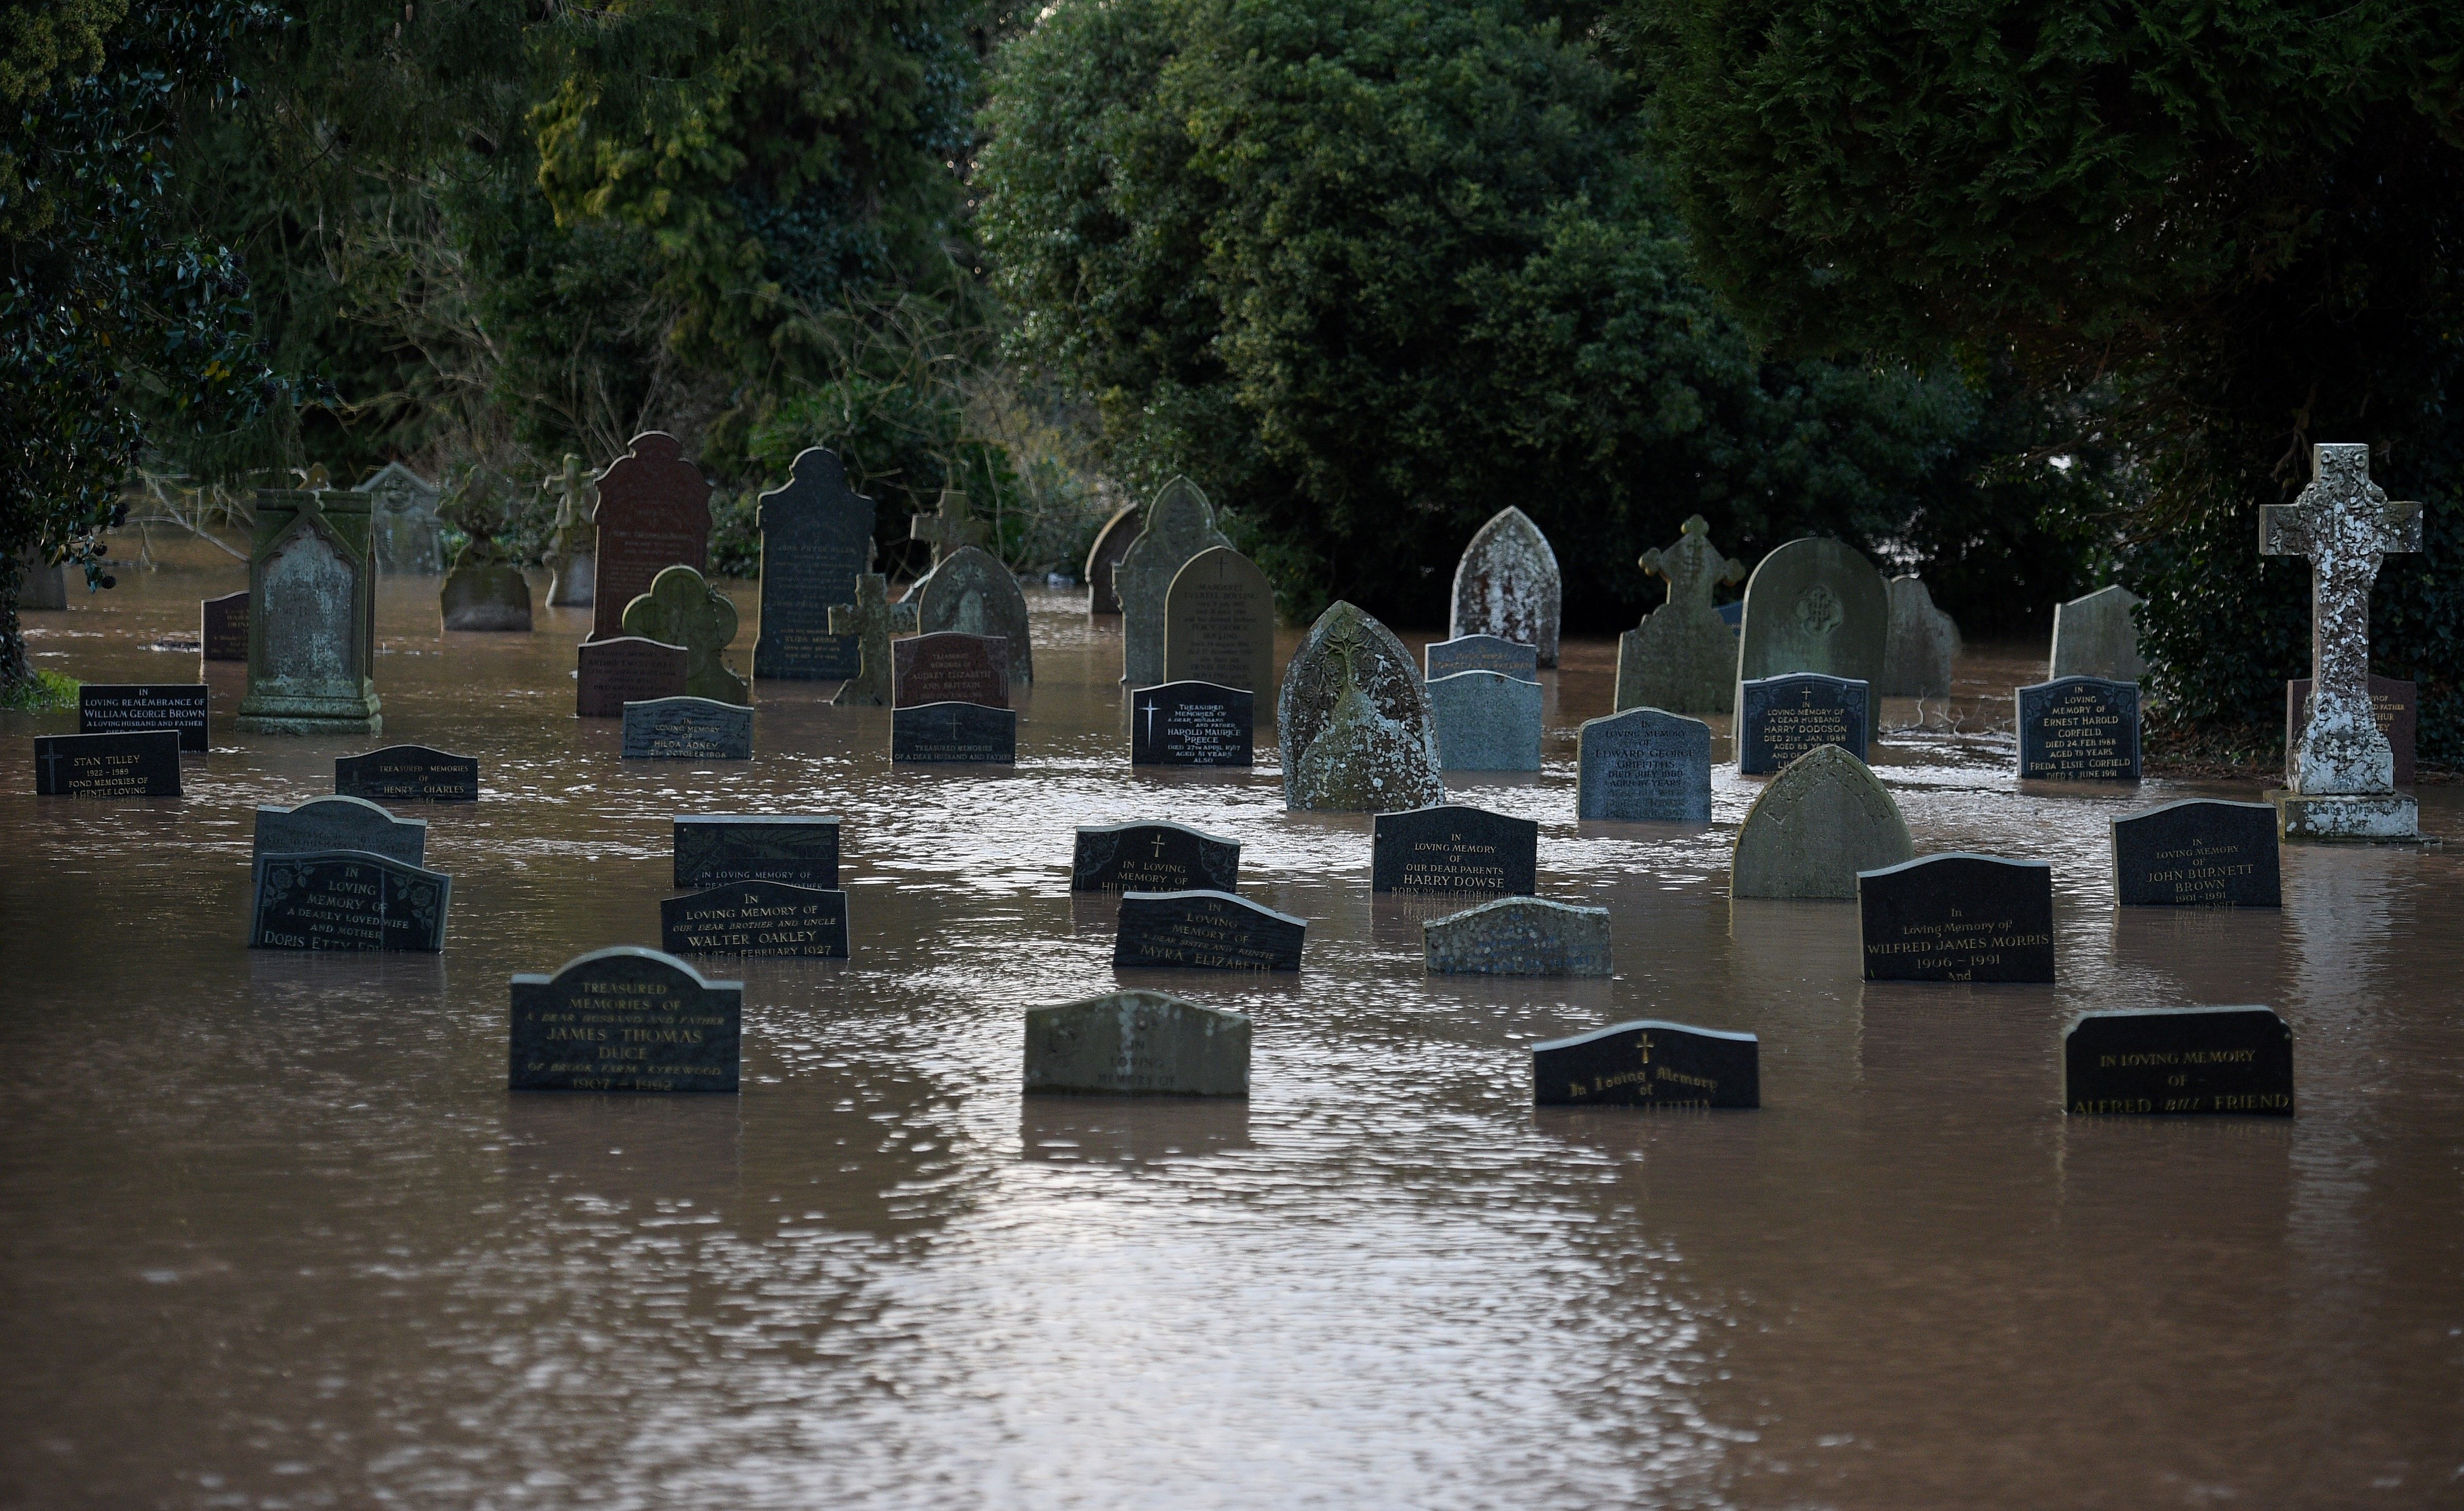  Flood water surrounds grave stones in a graveyard in Tenbury Wells, after the River Teme burst its banks in western England, on February 16, 2020